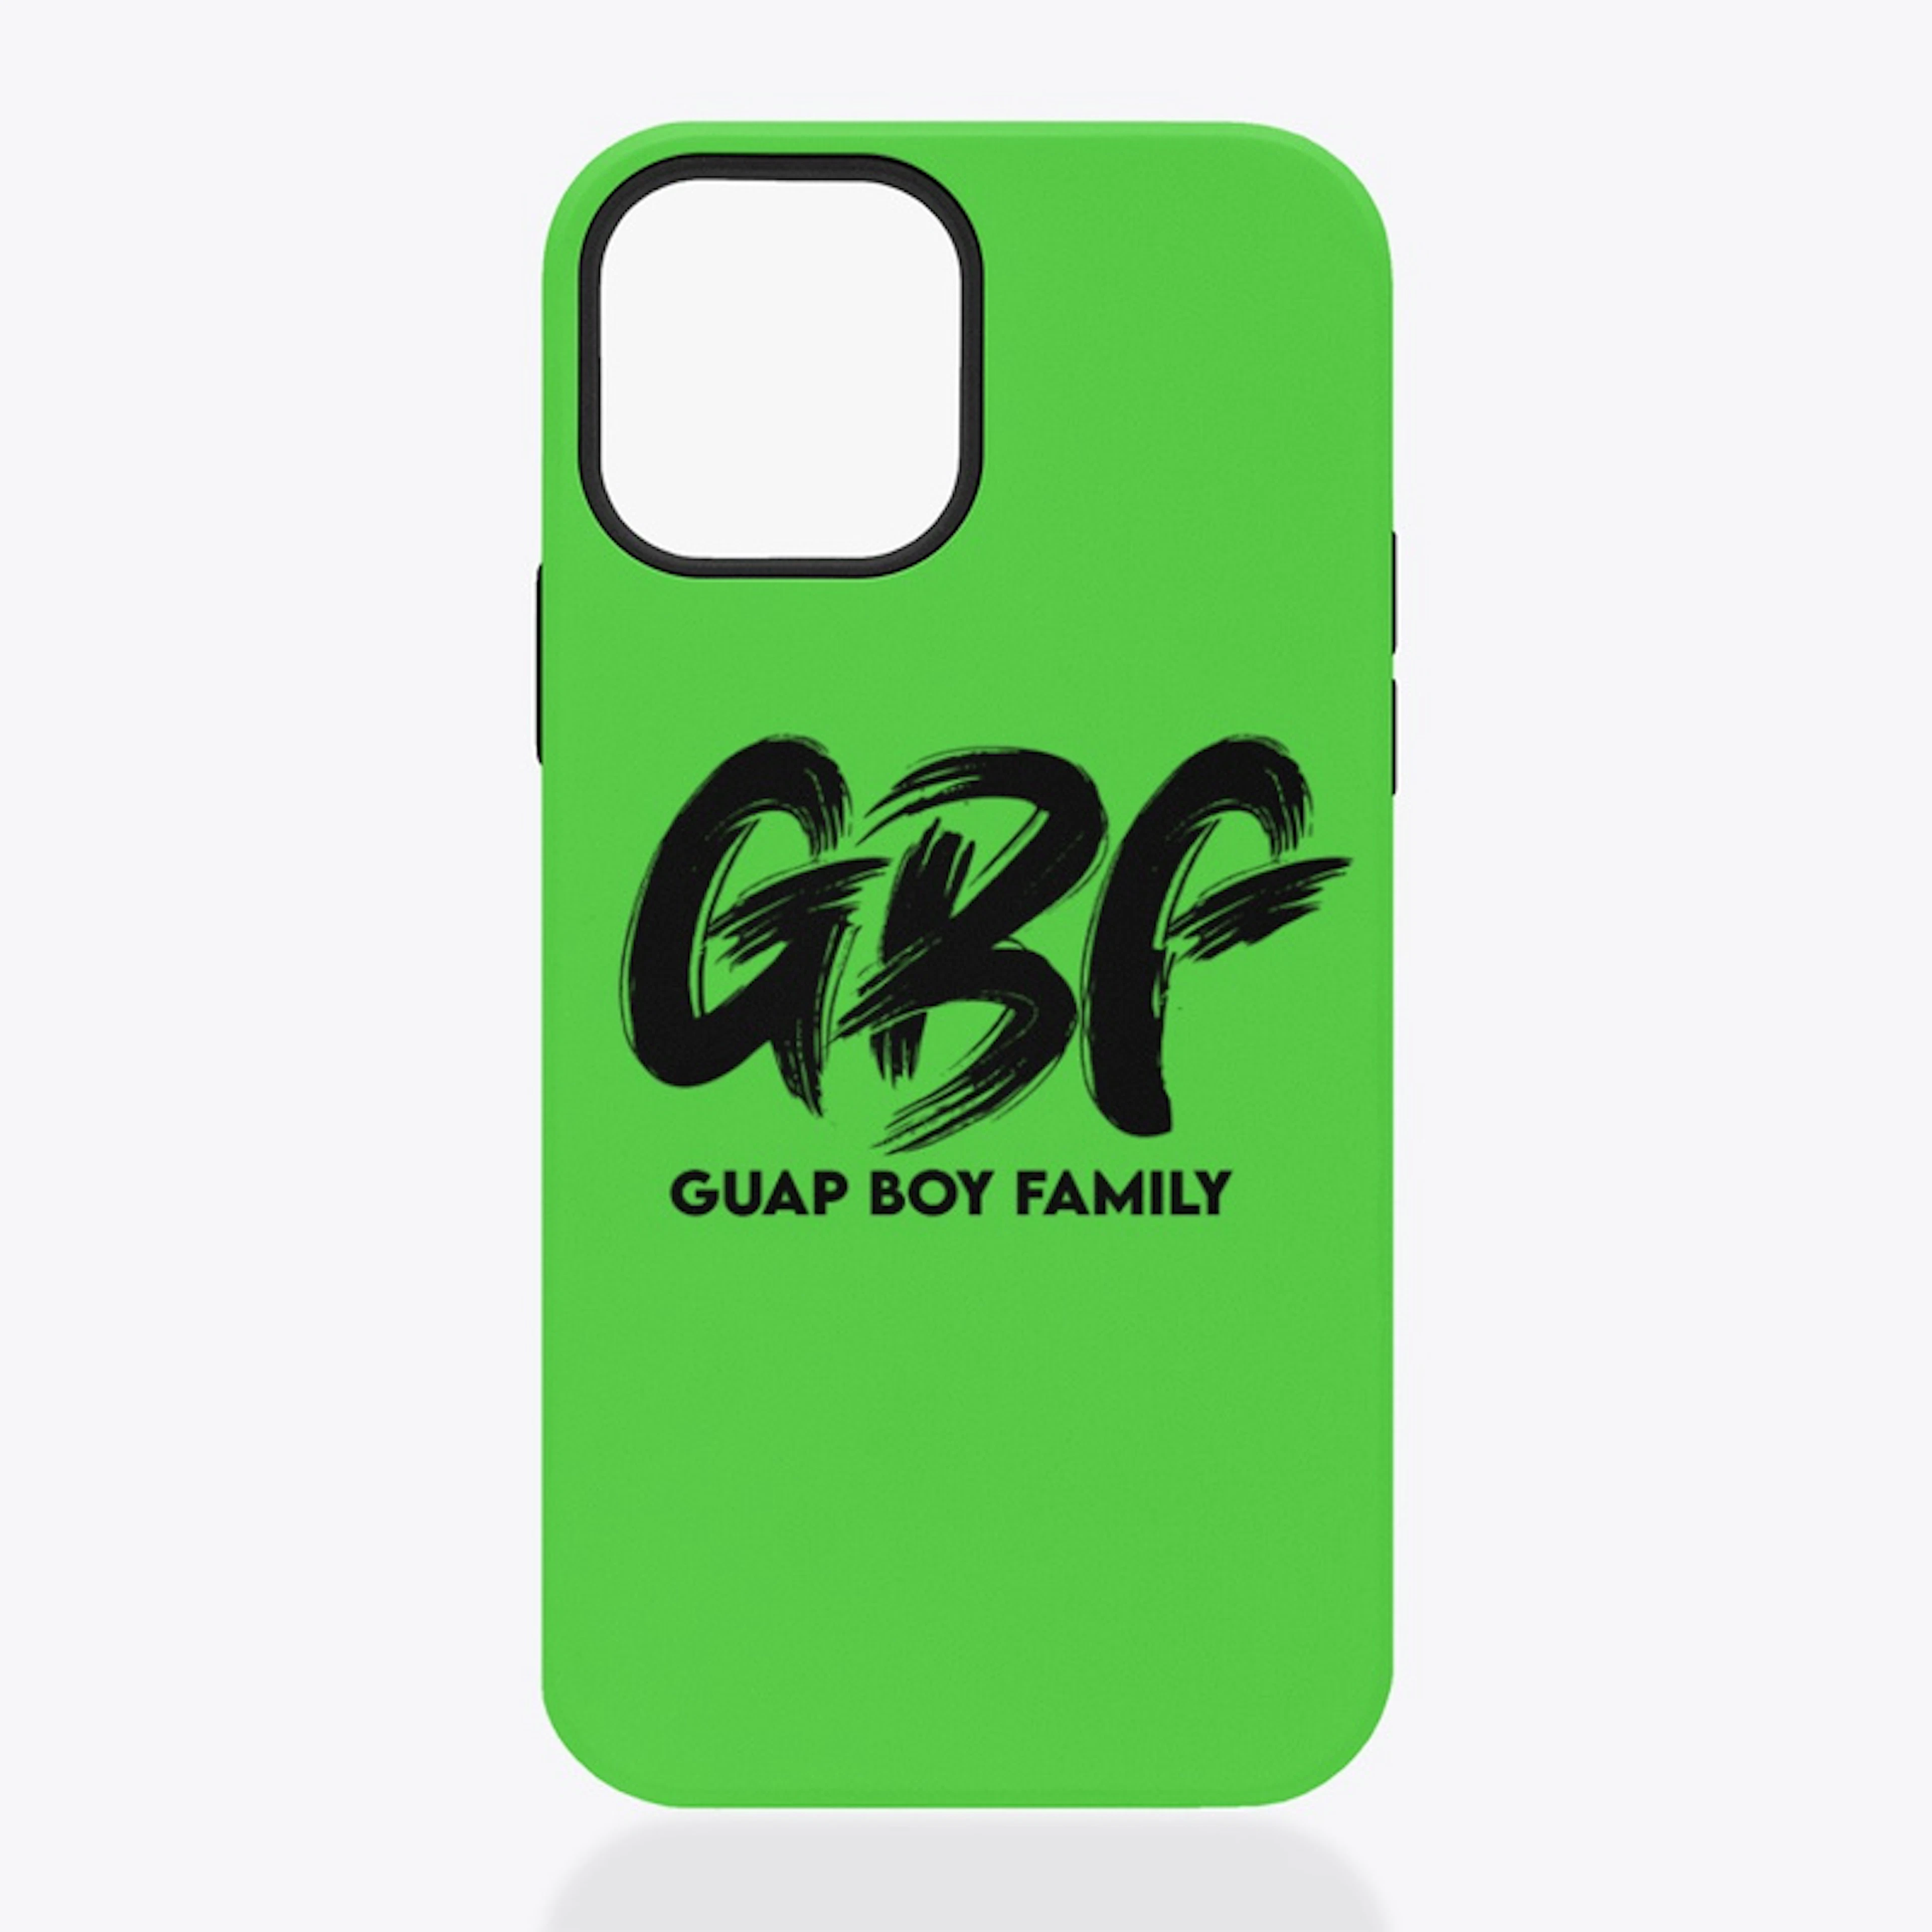 Guap Boy Family iPhone Cases 